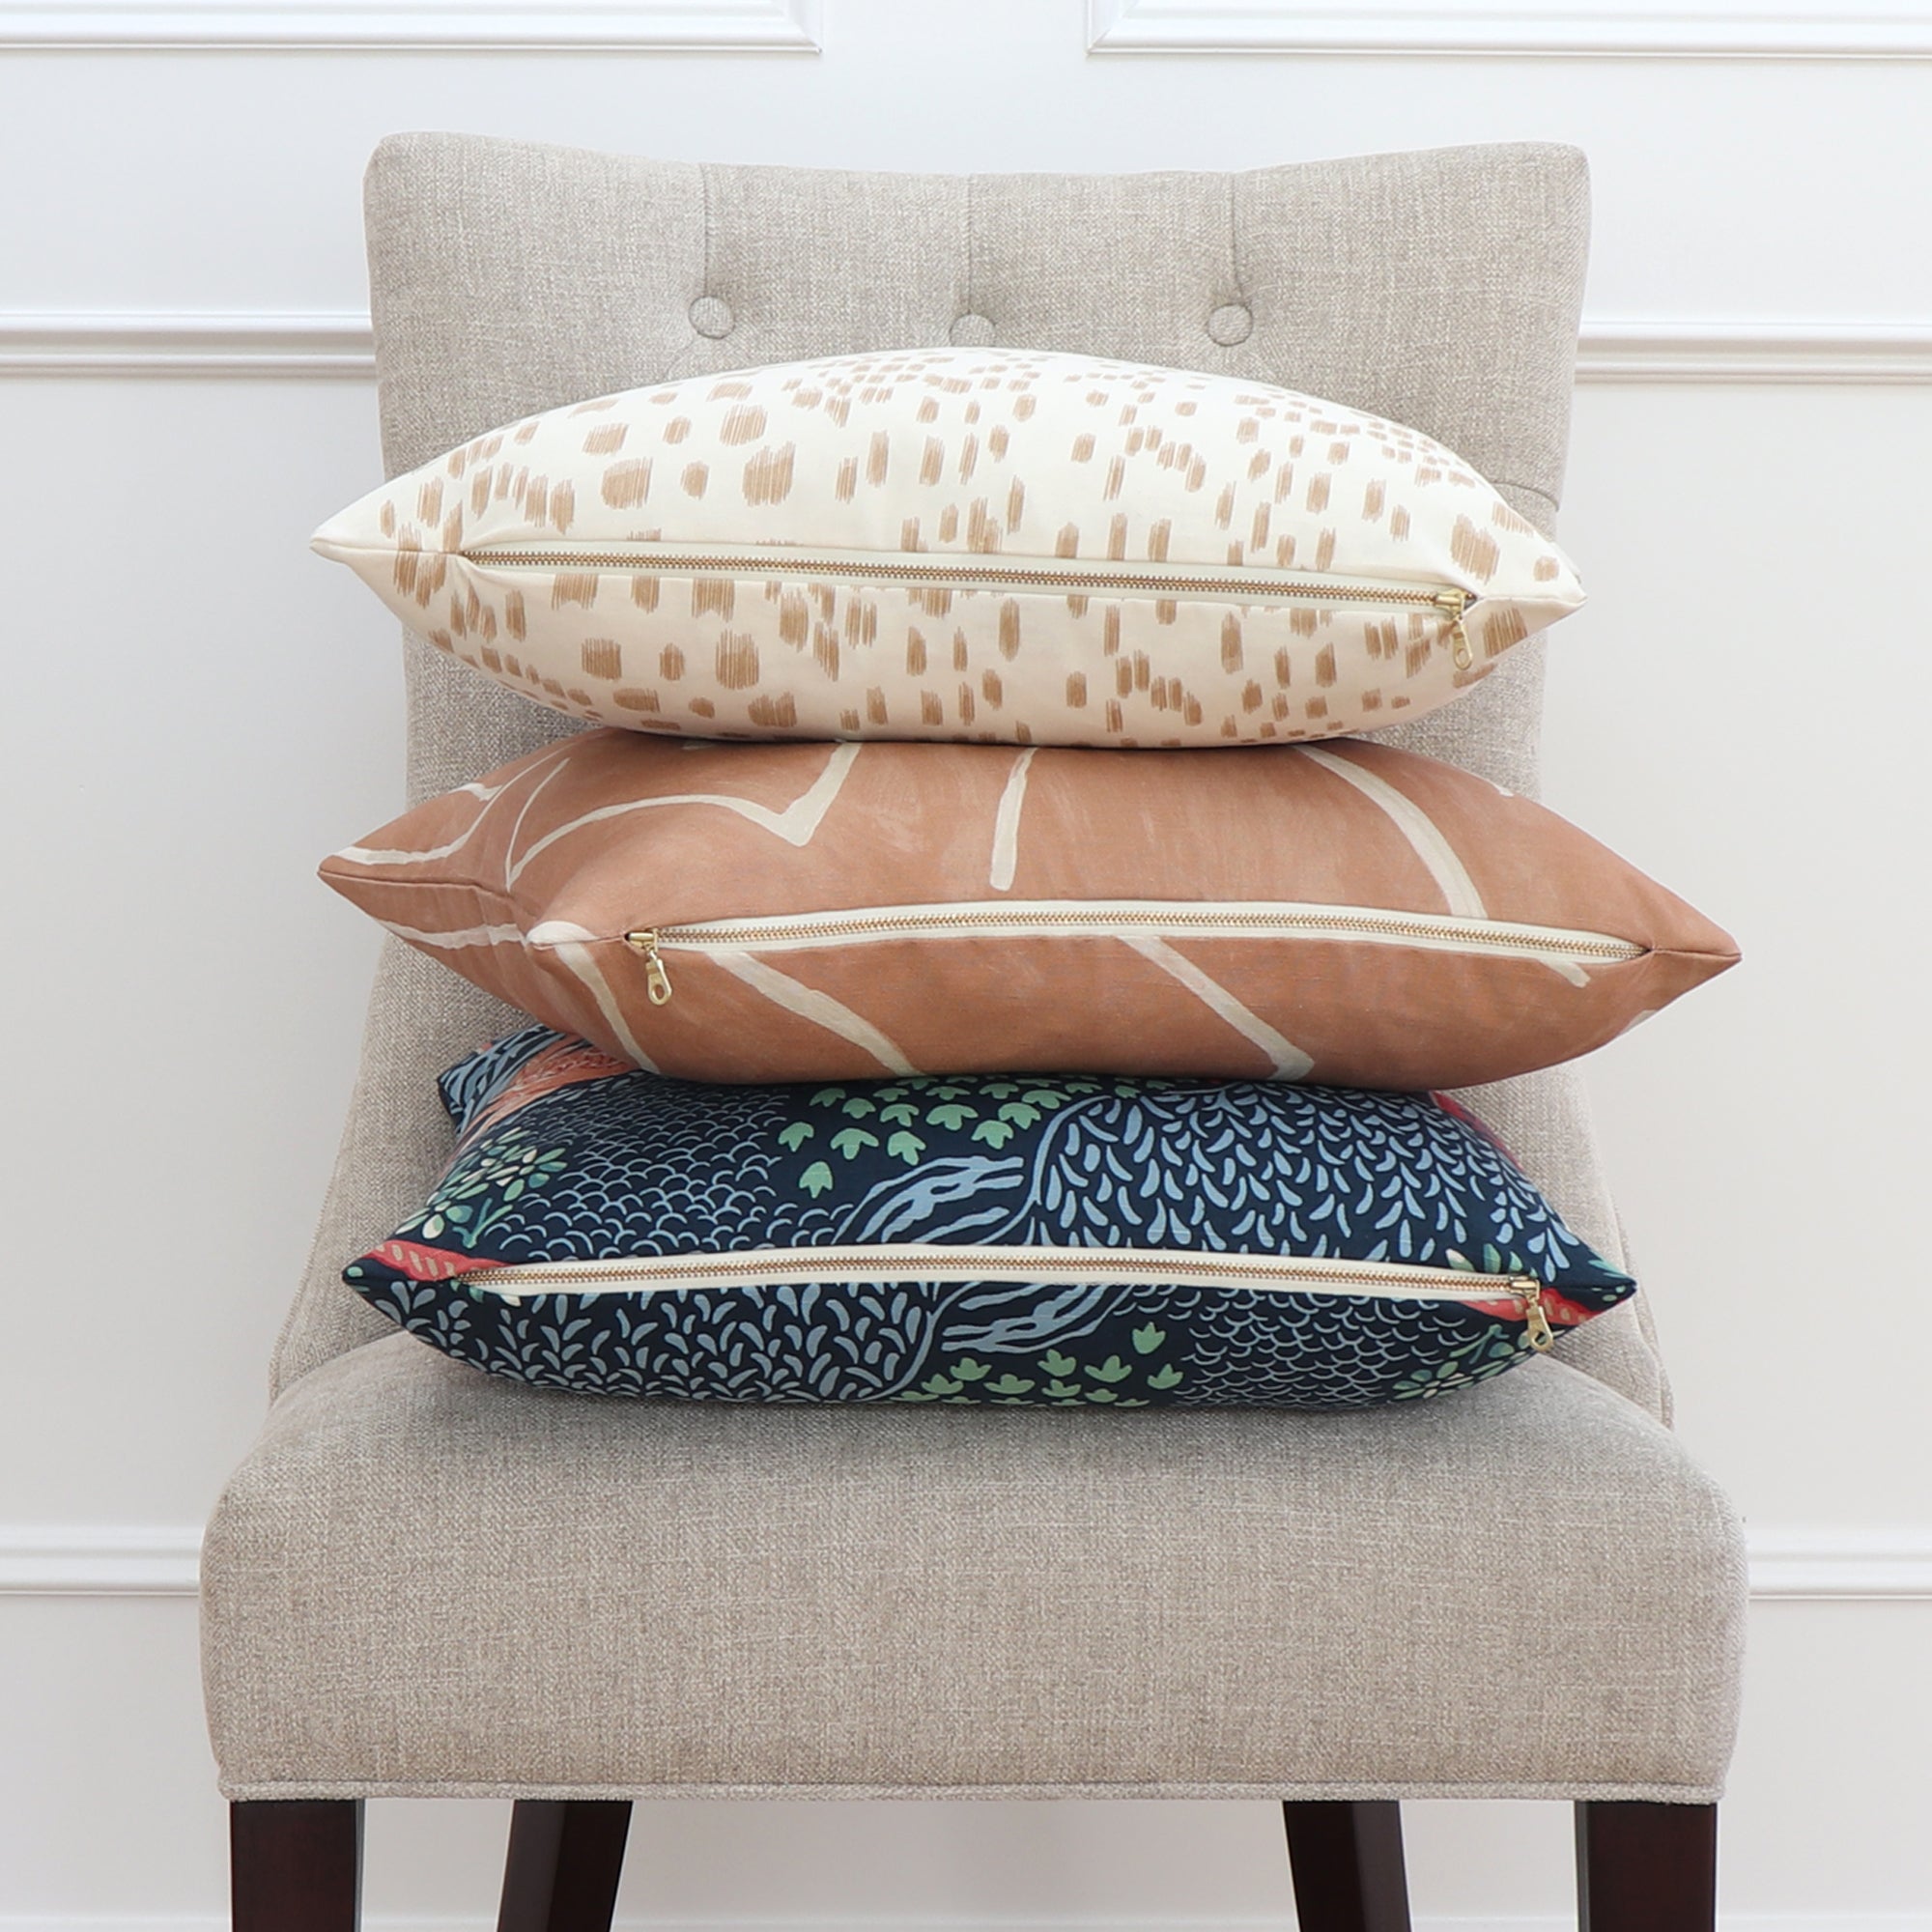 Pillow Insert Size Guide - Chloe & Olive